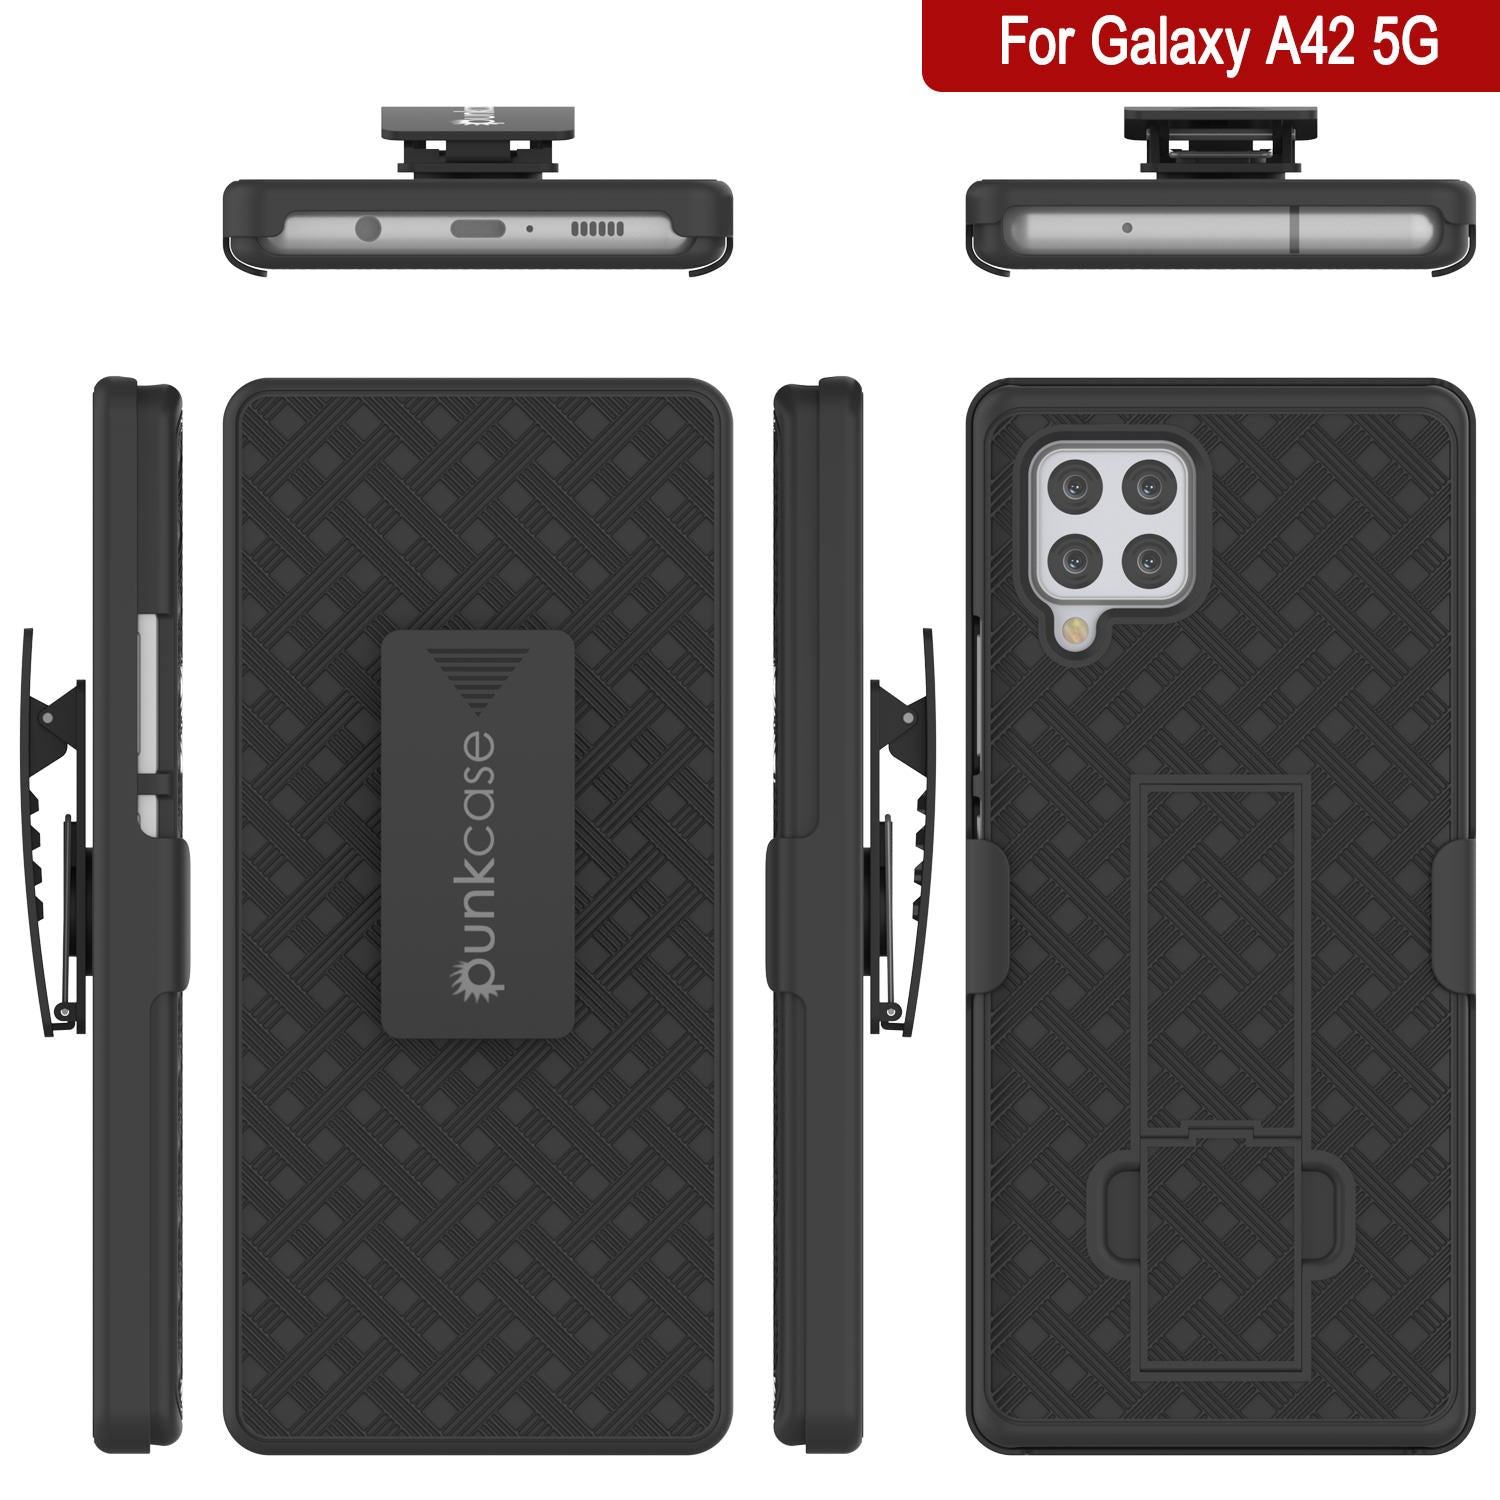 Punkcase Galaxy A42 5G Case With Screen Protector, Holster Belt Clip [Black]